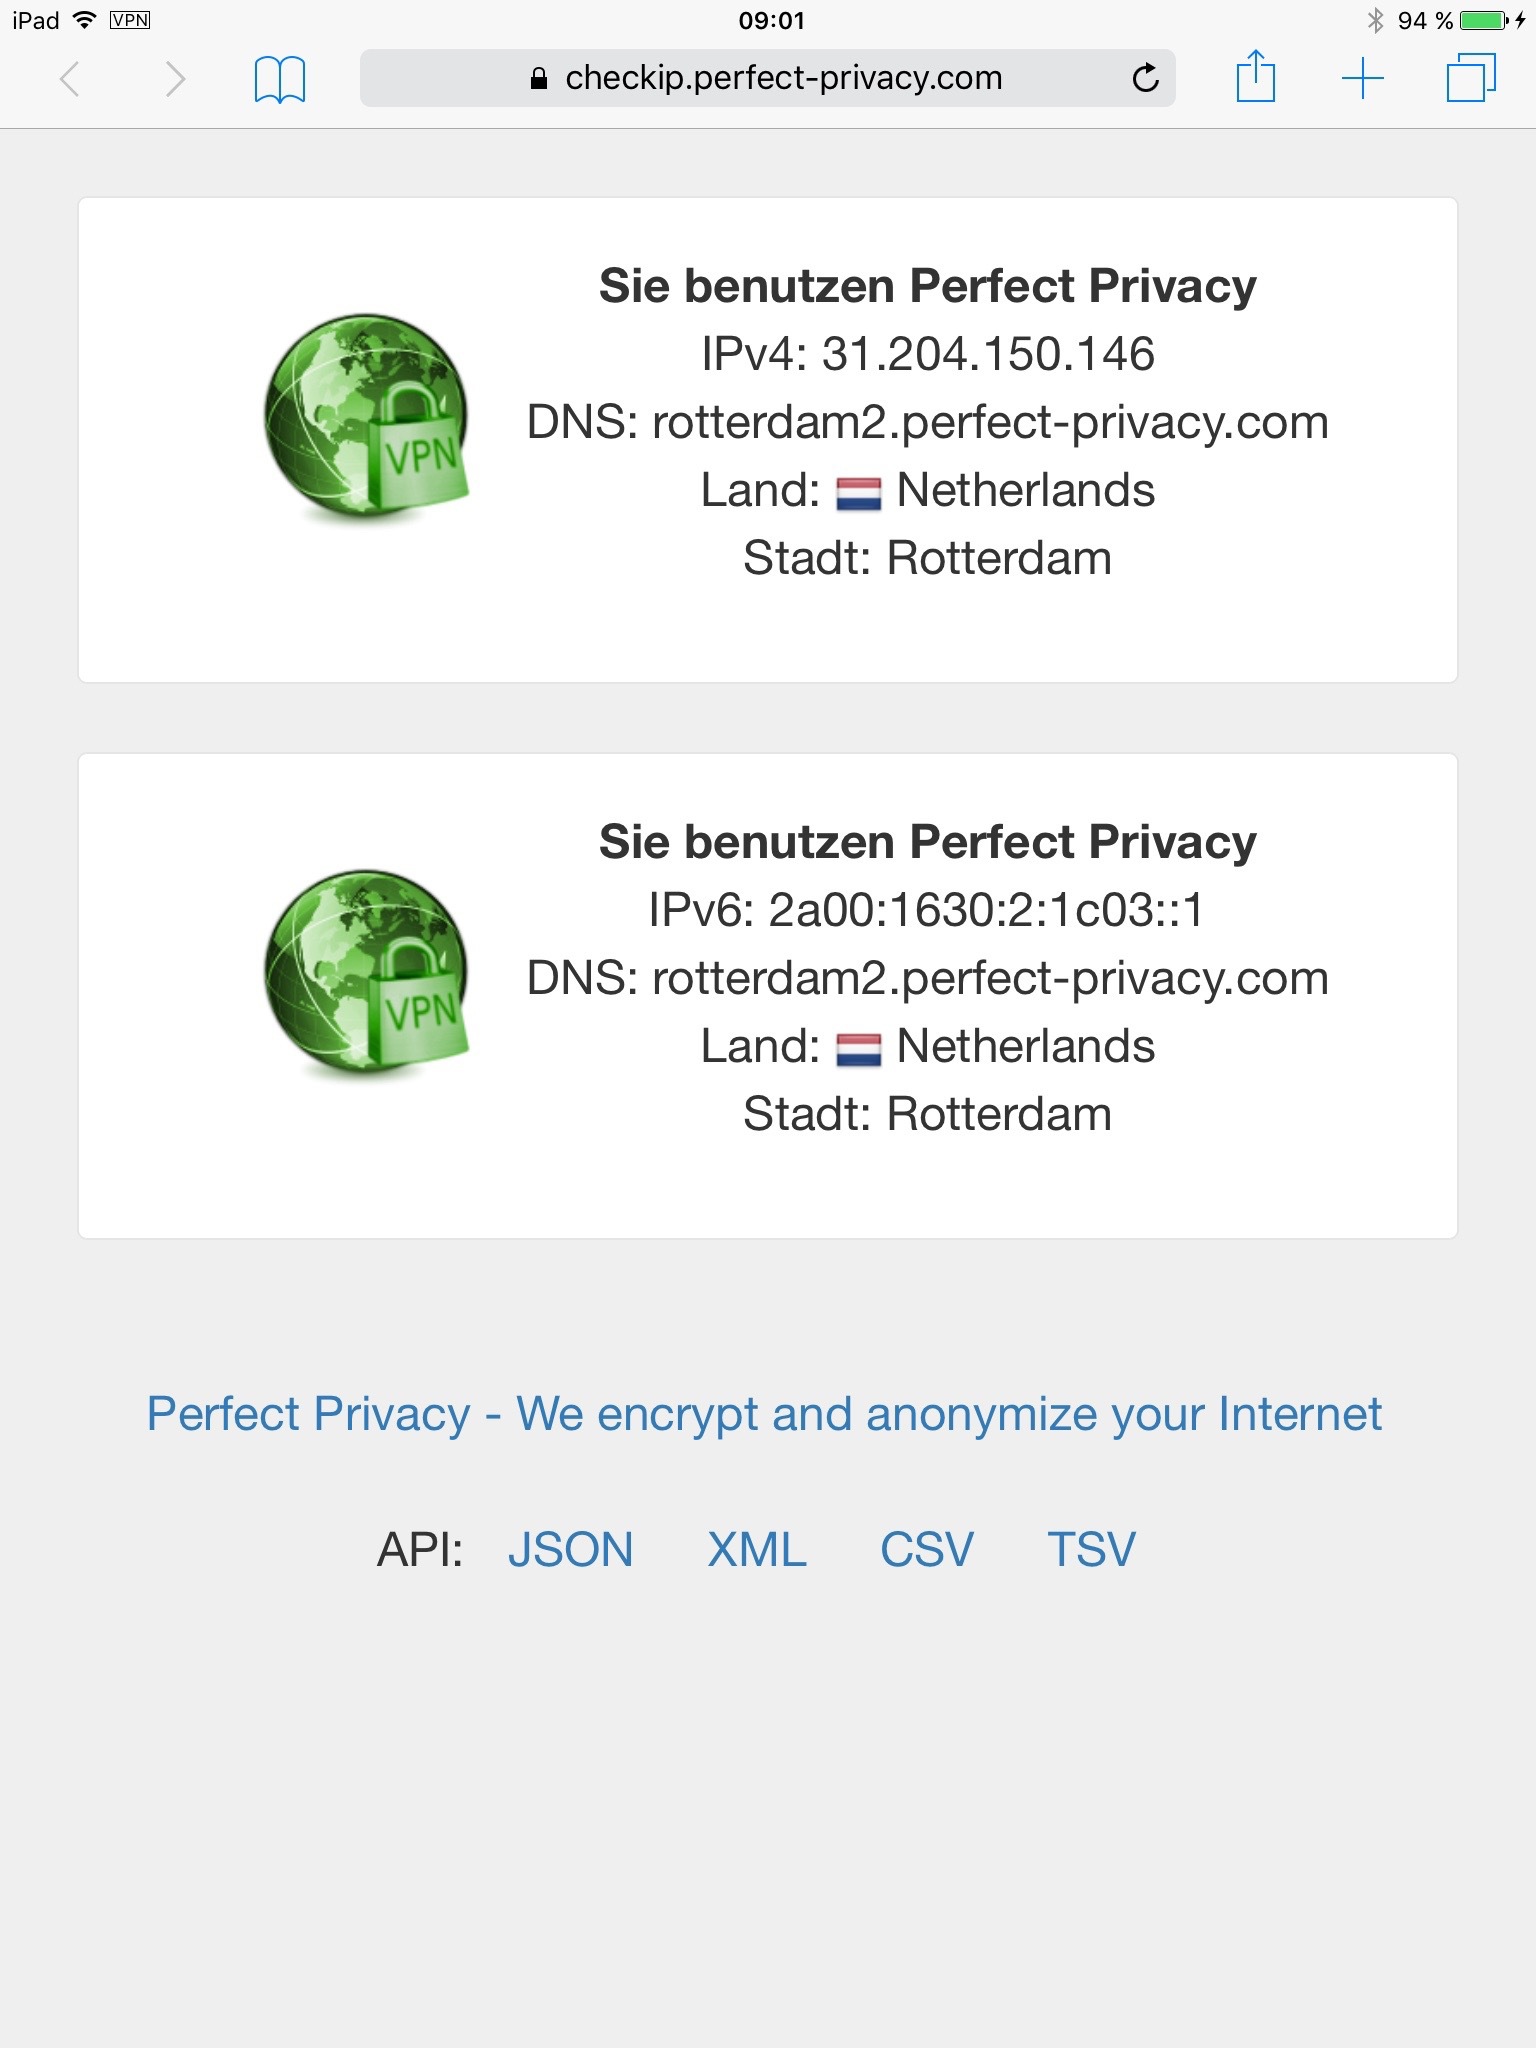 Perfect Privacy Check IP | Always-On VPN with iPhone and iPad